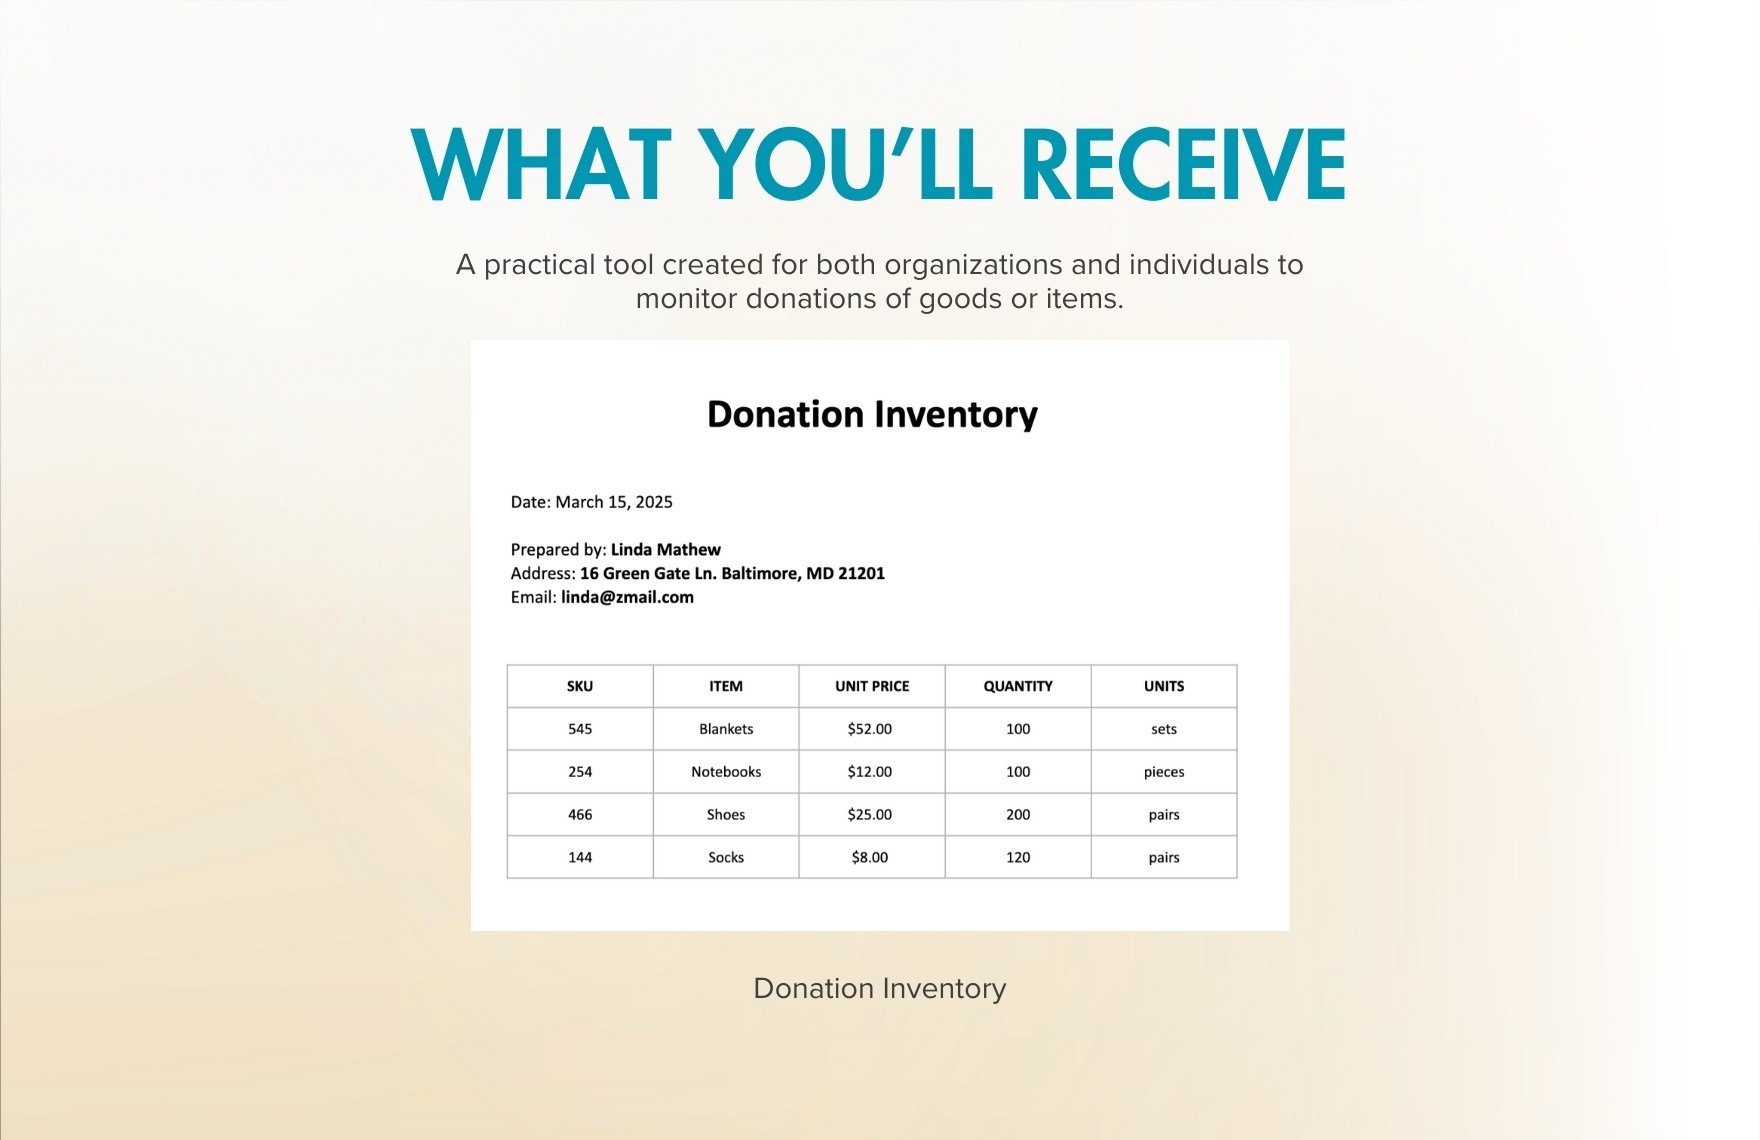 Donation Inventory Template